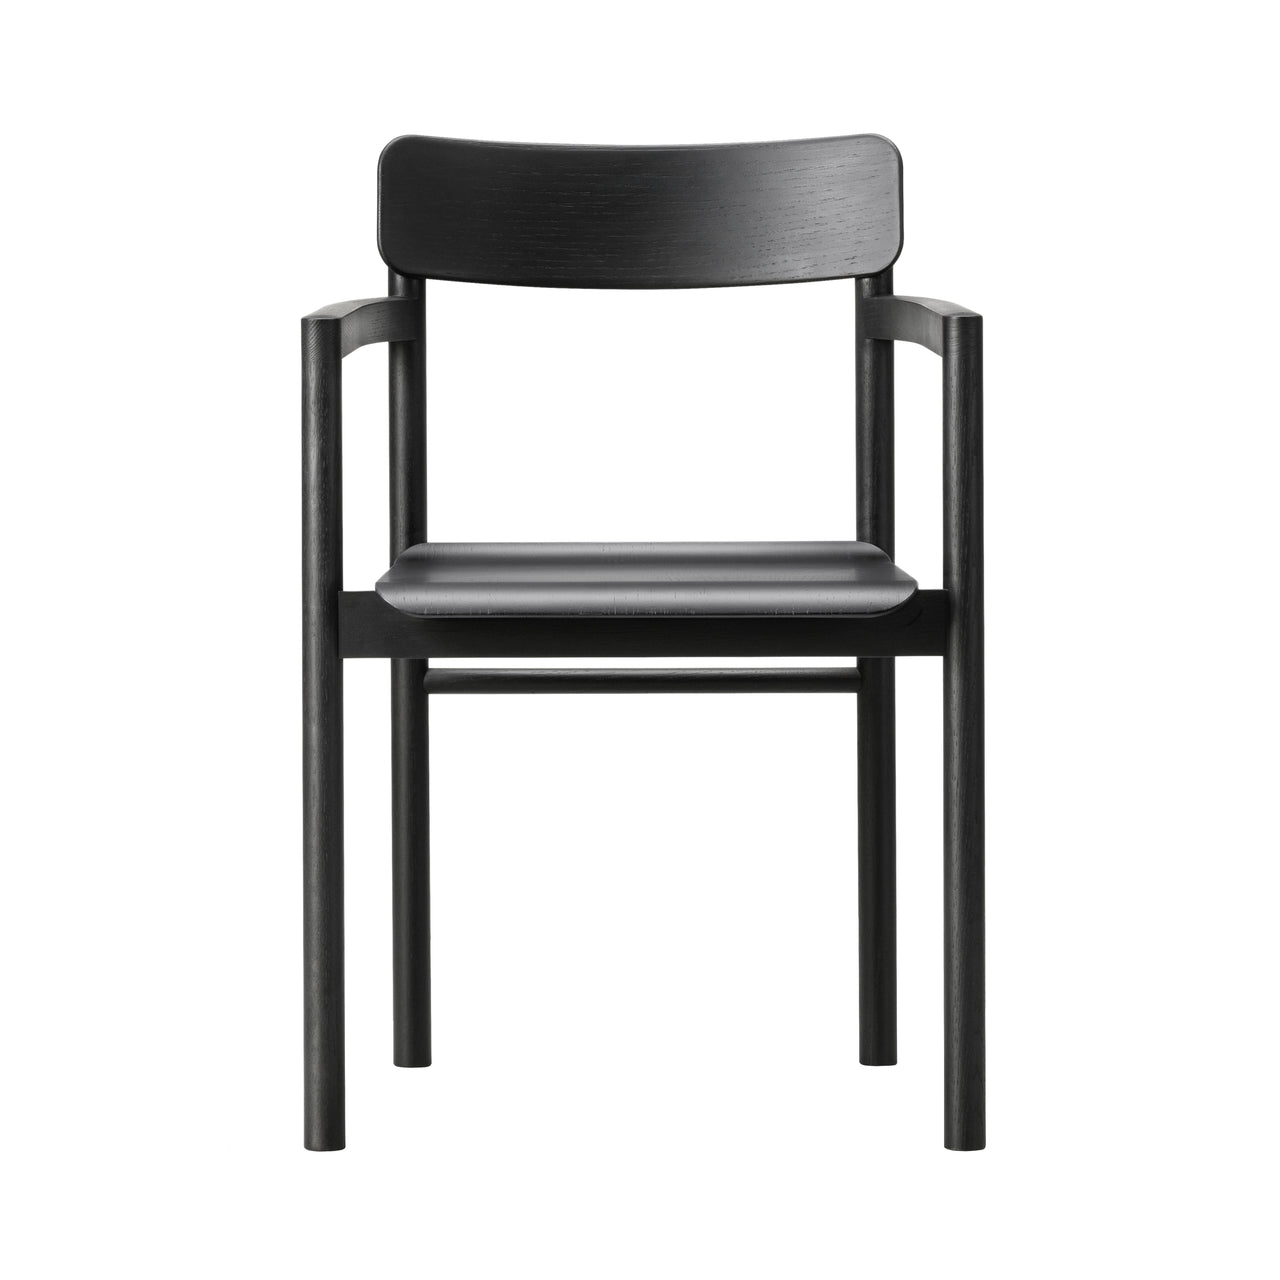 Post Chair: Black Lacquered Oak